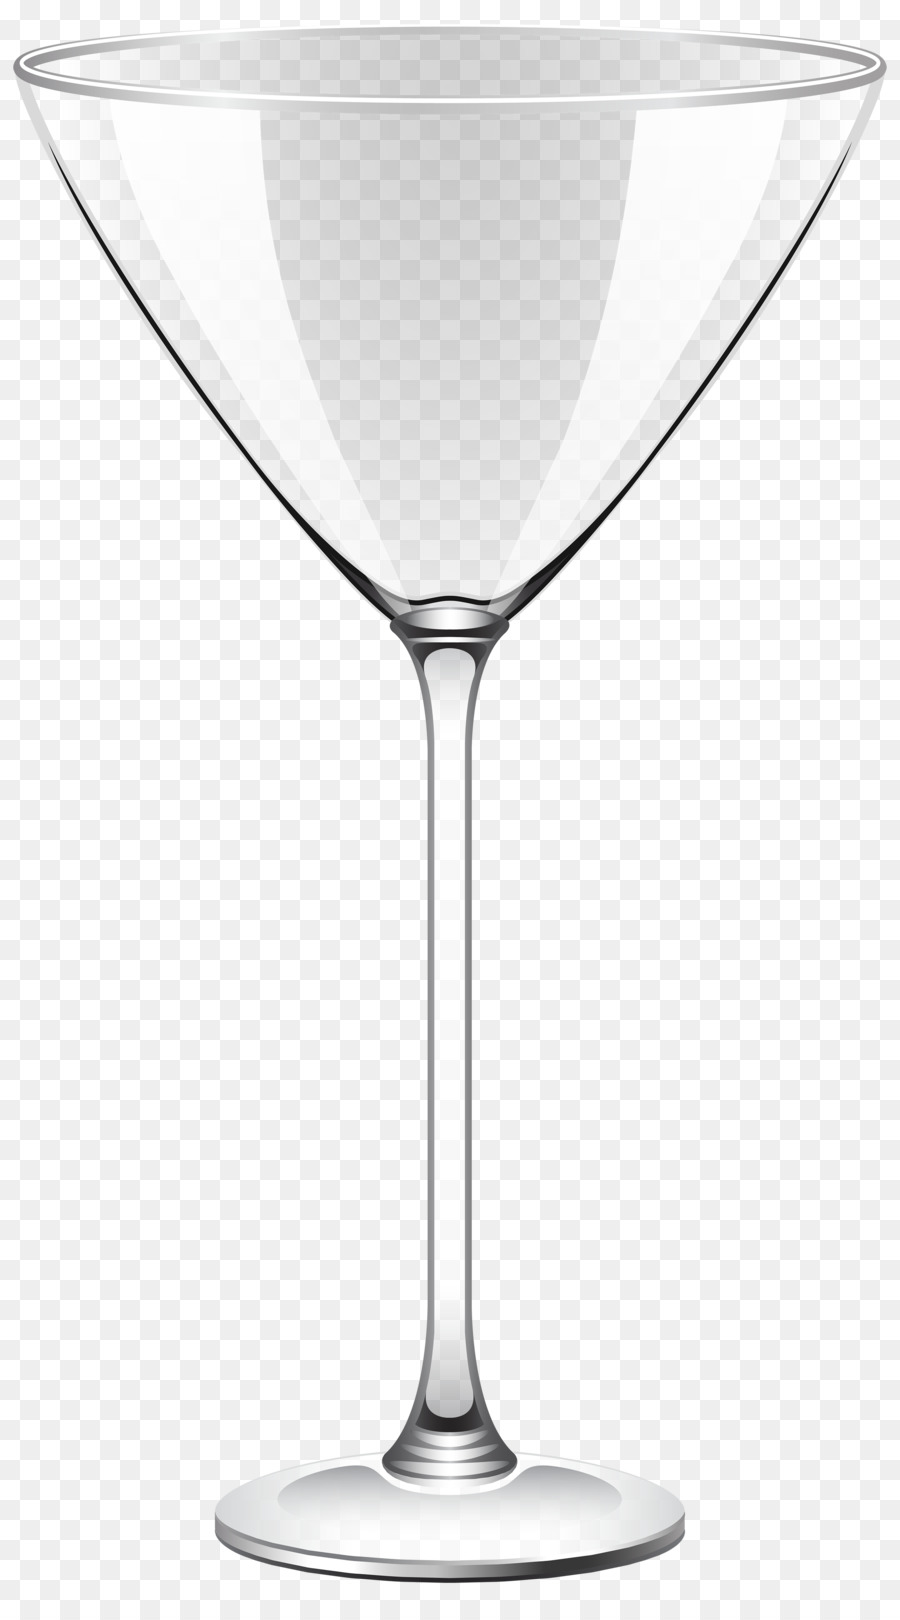 Cocktail glass Margarita Martini Clip art - glass png download - 2240*4000 - Free Transparent Cocktail png Download.